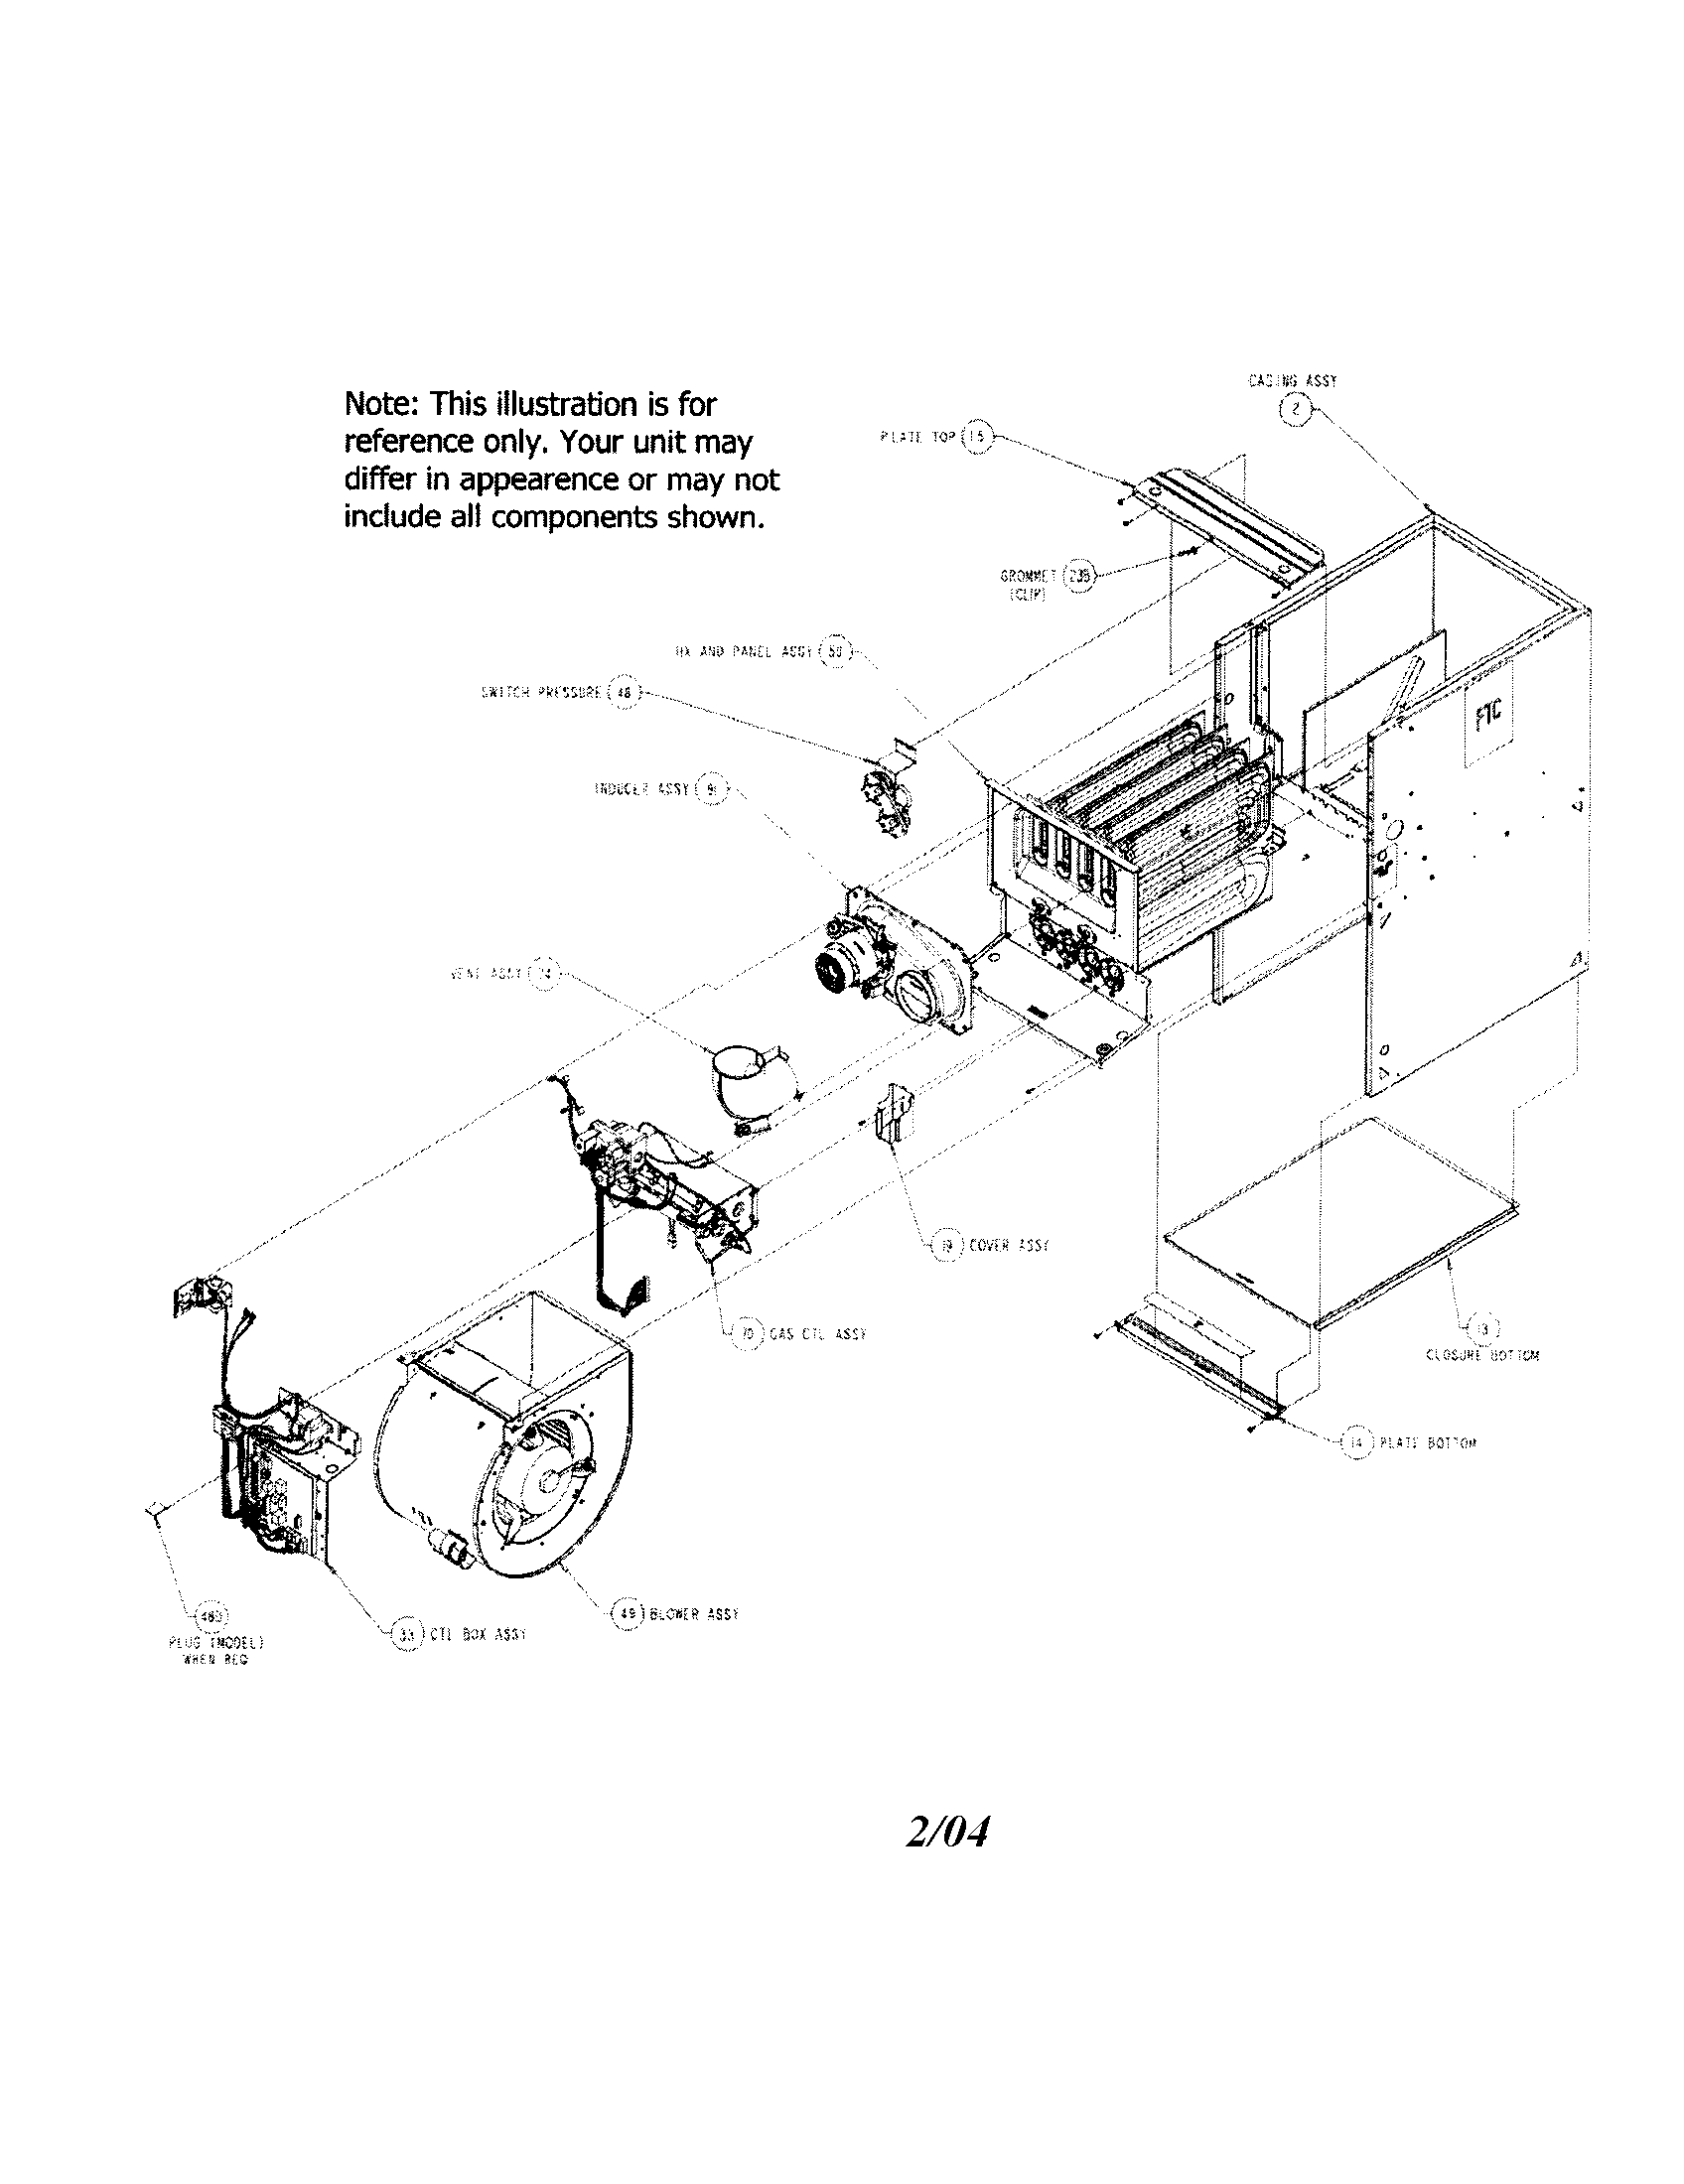 Carrier  Furnace  Blower and casing assembly